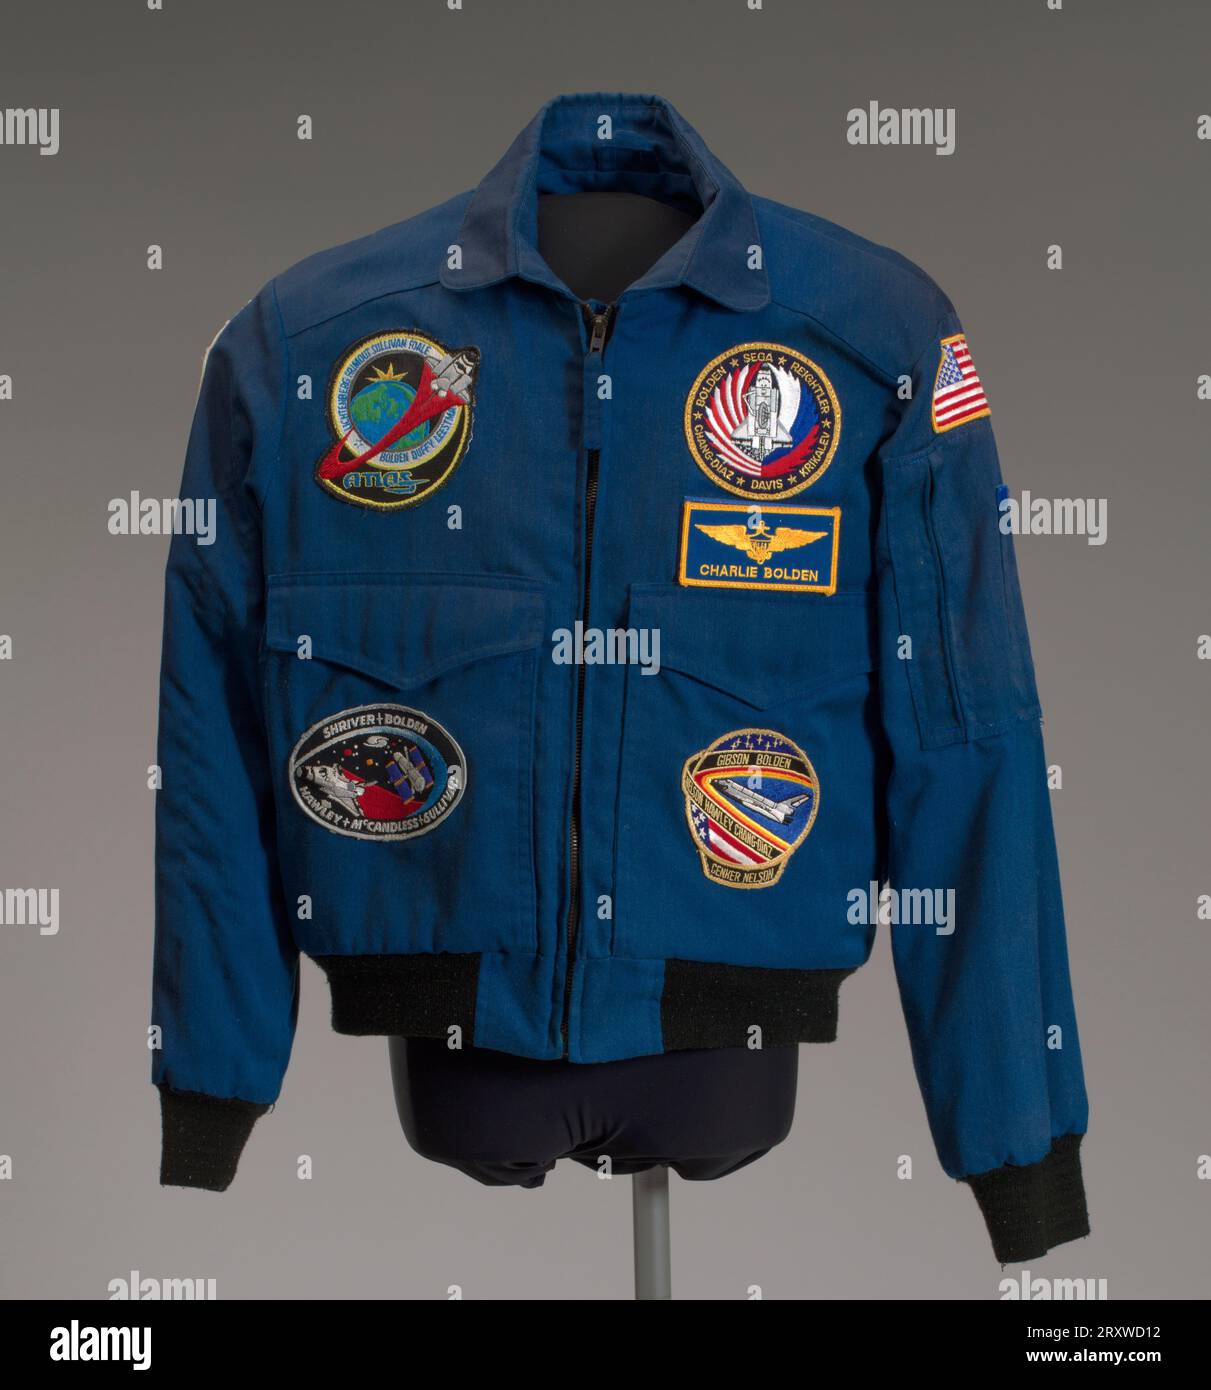 NASA flight jacket owned by Charles Bolden after 1985 Stock Photo